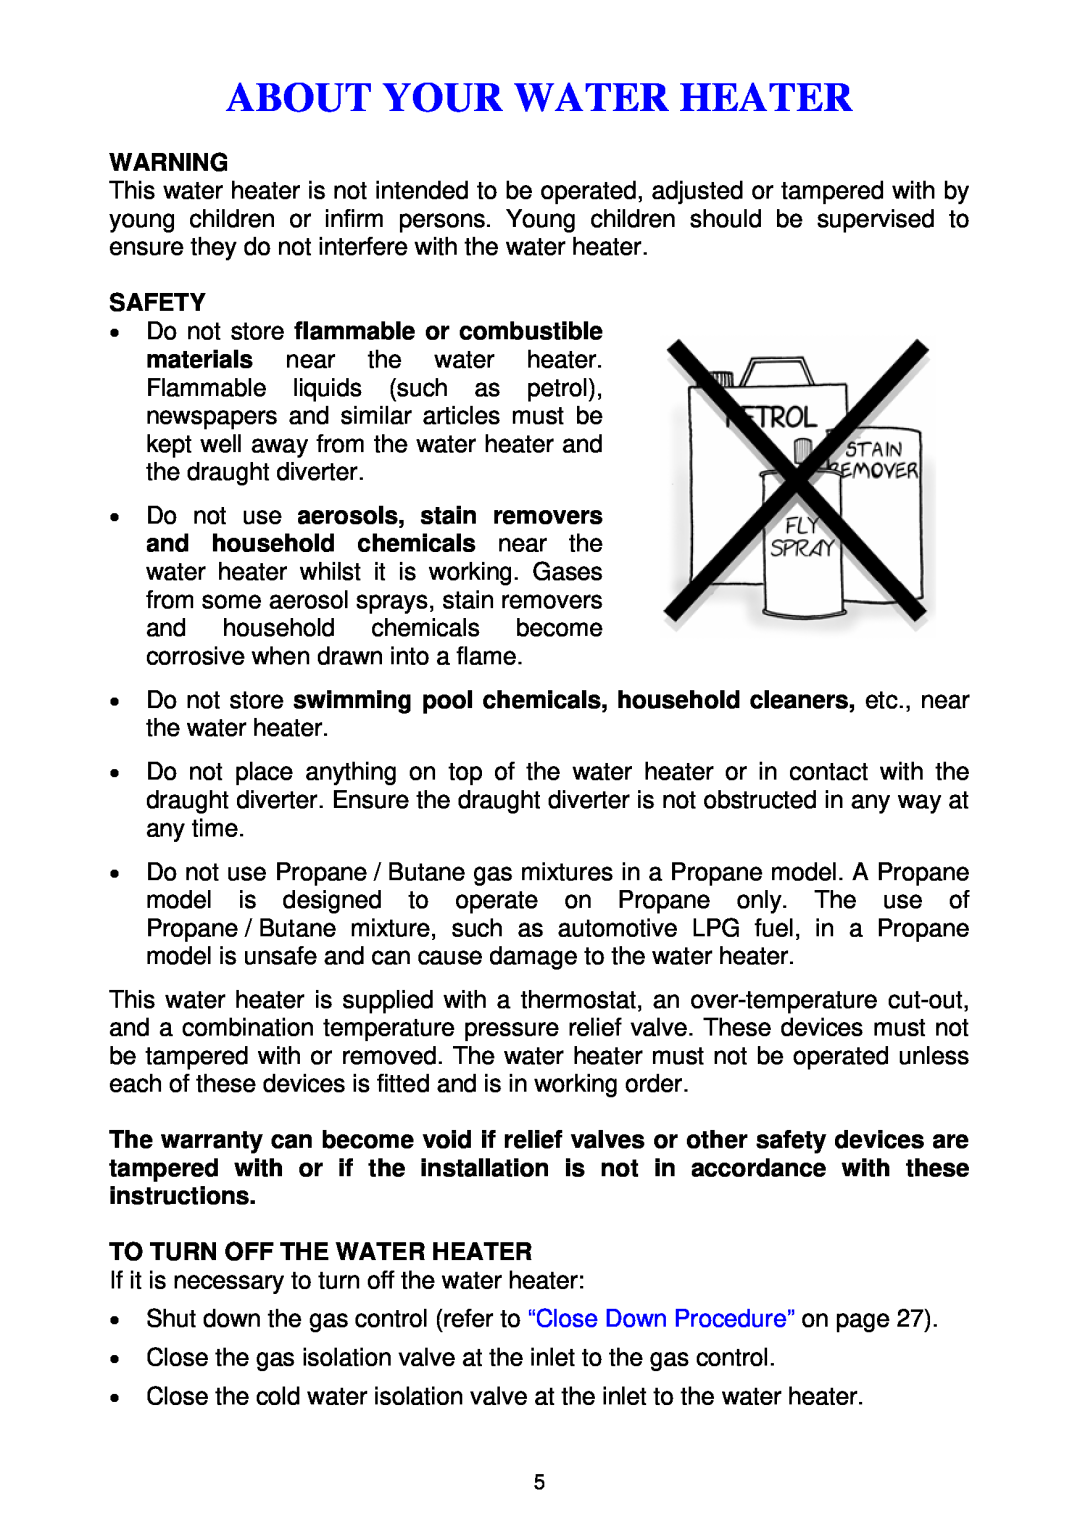 Rheem 300 series installation instructions Safety, To Turn Off The Water Heater, About Your Water Heater 